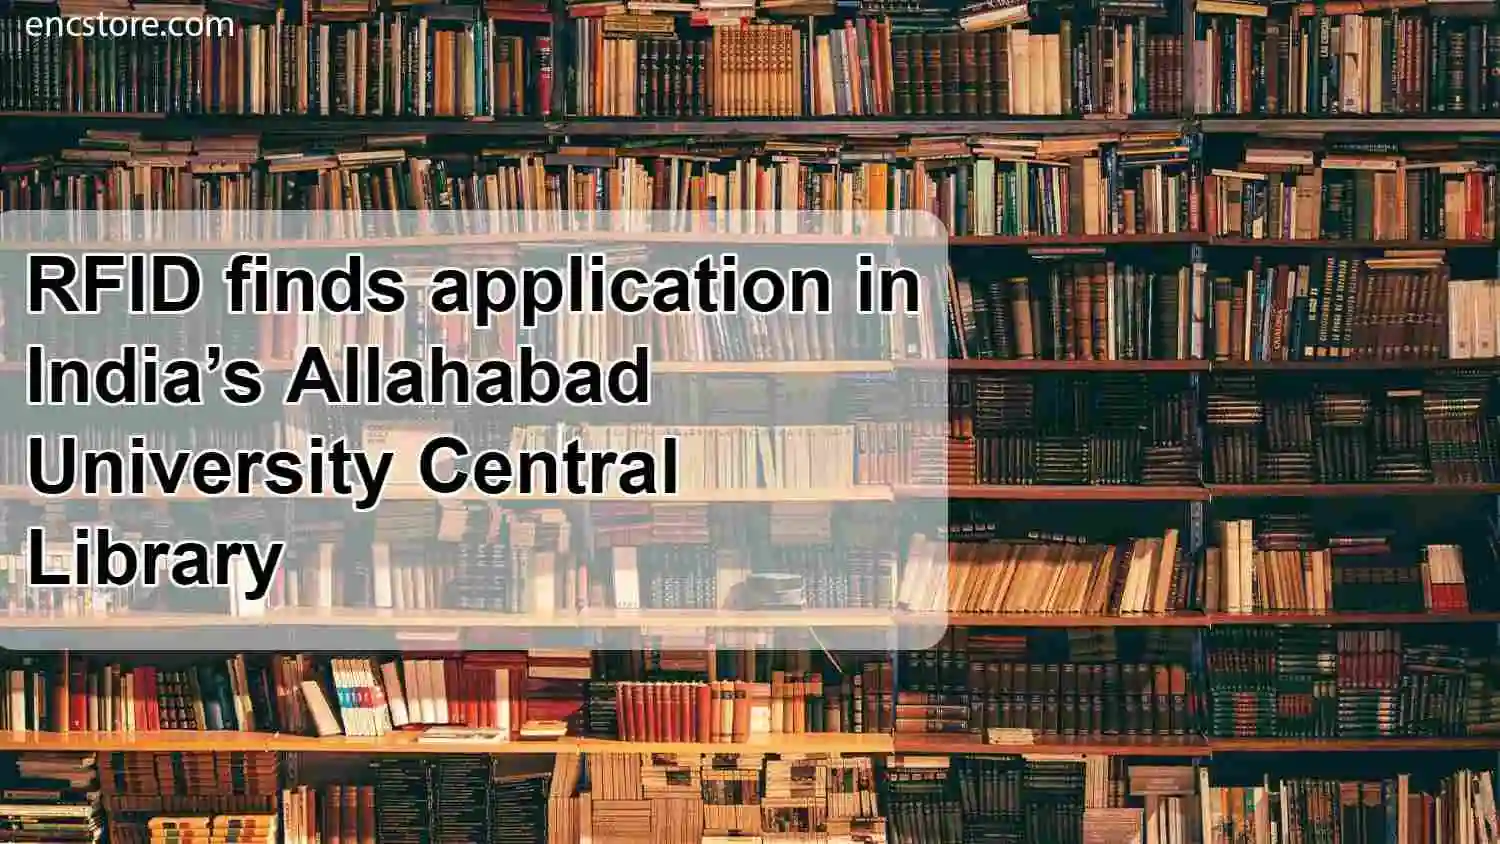 RFID finds application in India’s Allahabad University Central Library